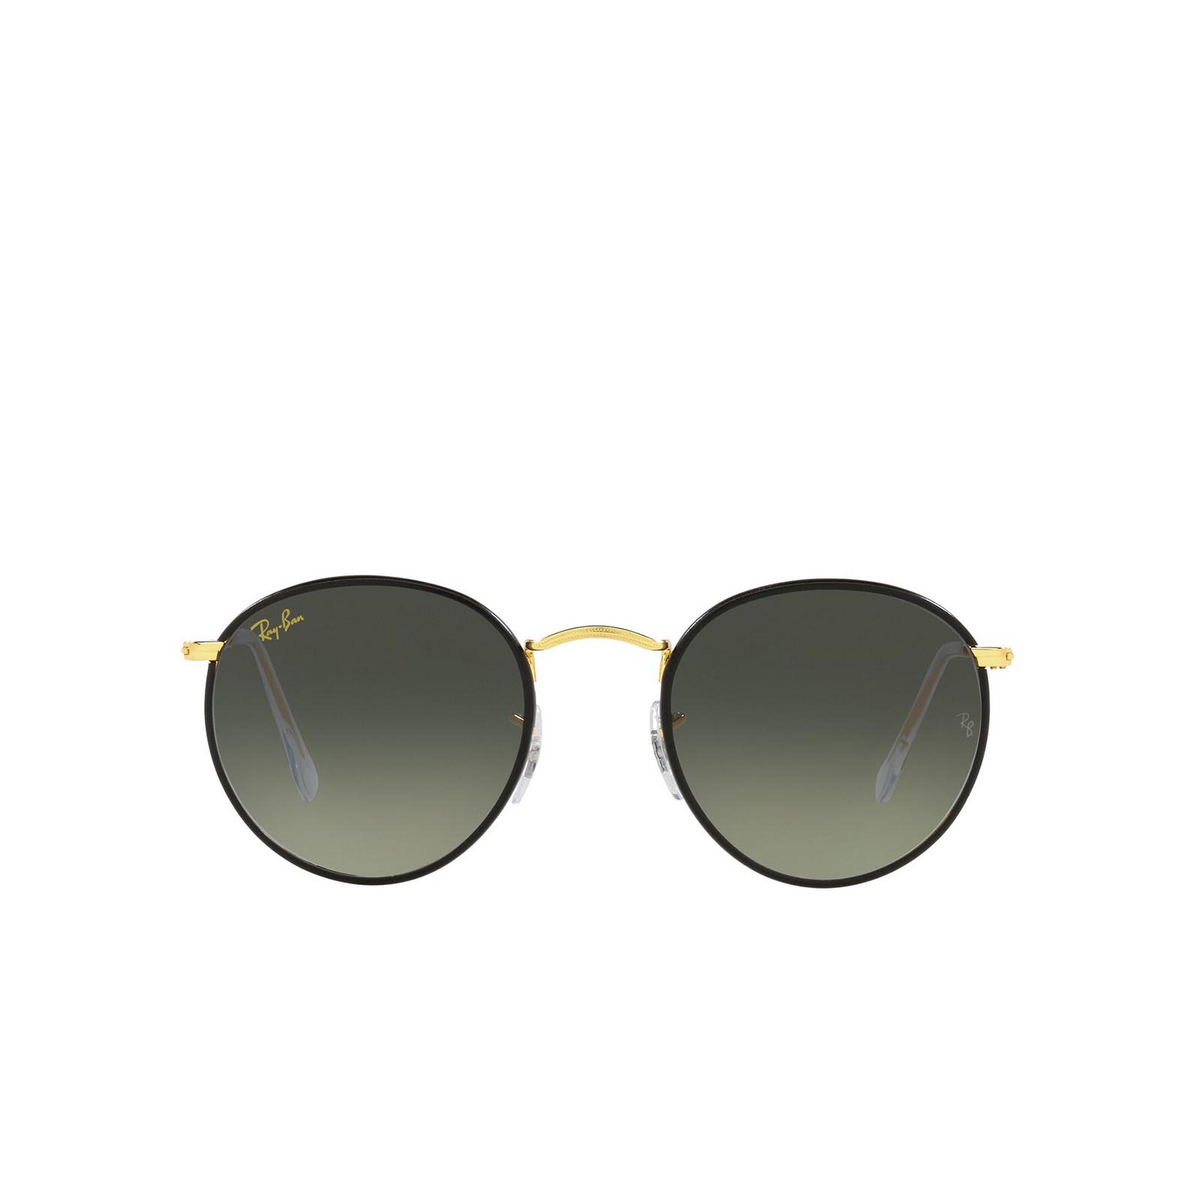 Ray-Ban ROUND FULL COLOR Sunglasses 919671 Black on Legend Gold - front view